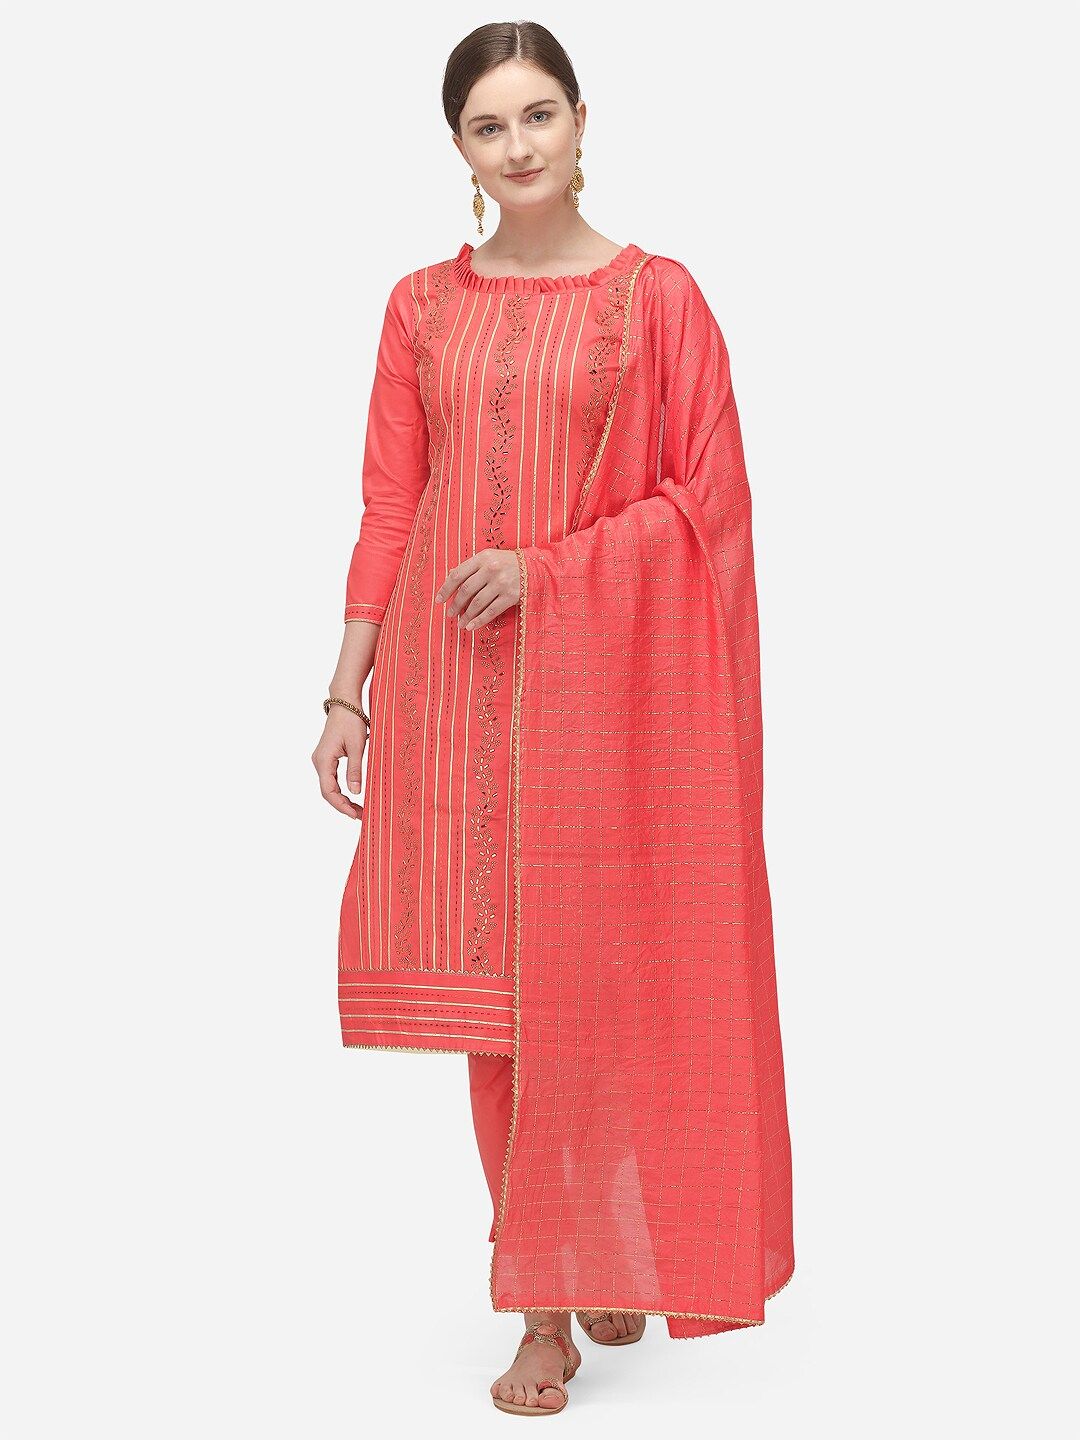 Ethnic Junction Pink & Golden Embellished Unstitched Dress Material Price in India